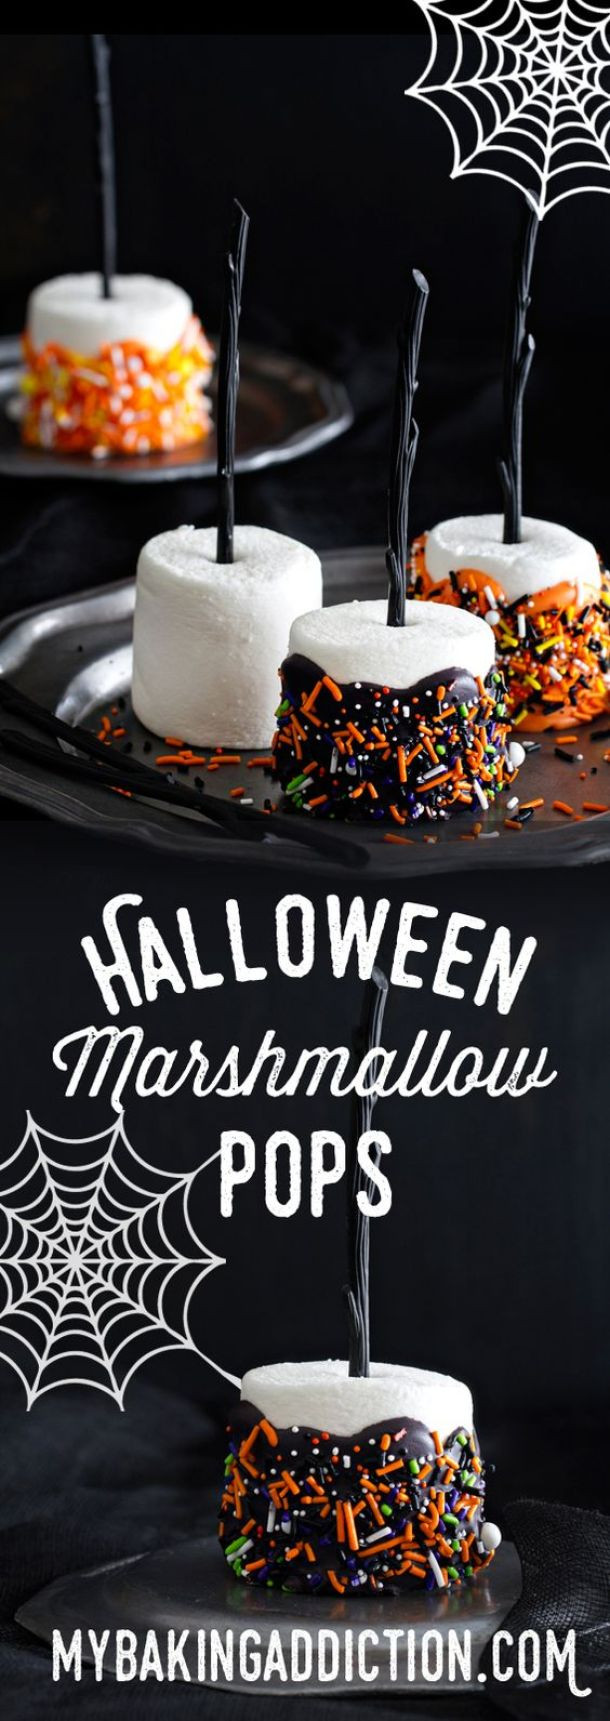 Halloween Party Desserts
 The BEST Halloween Party Recipes Spooktacular Desserts